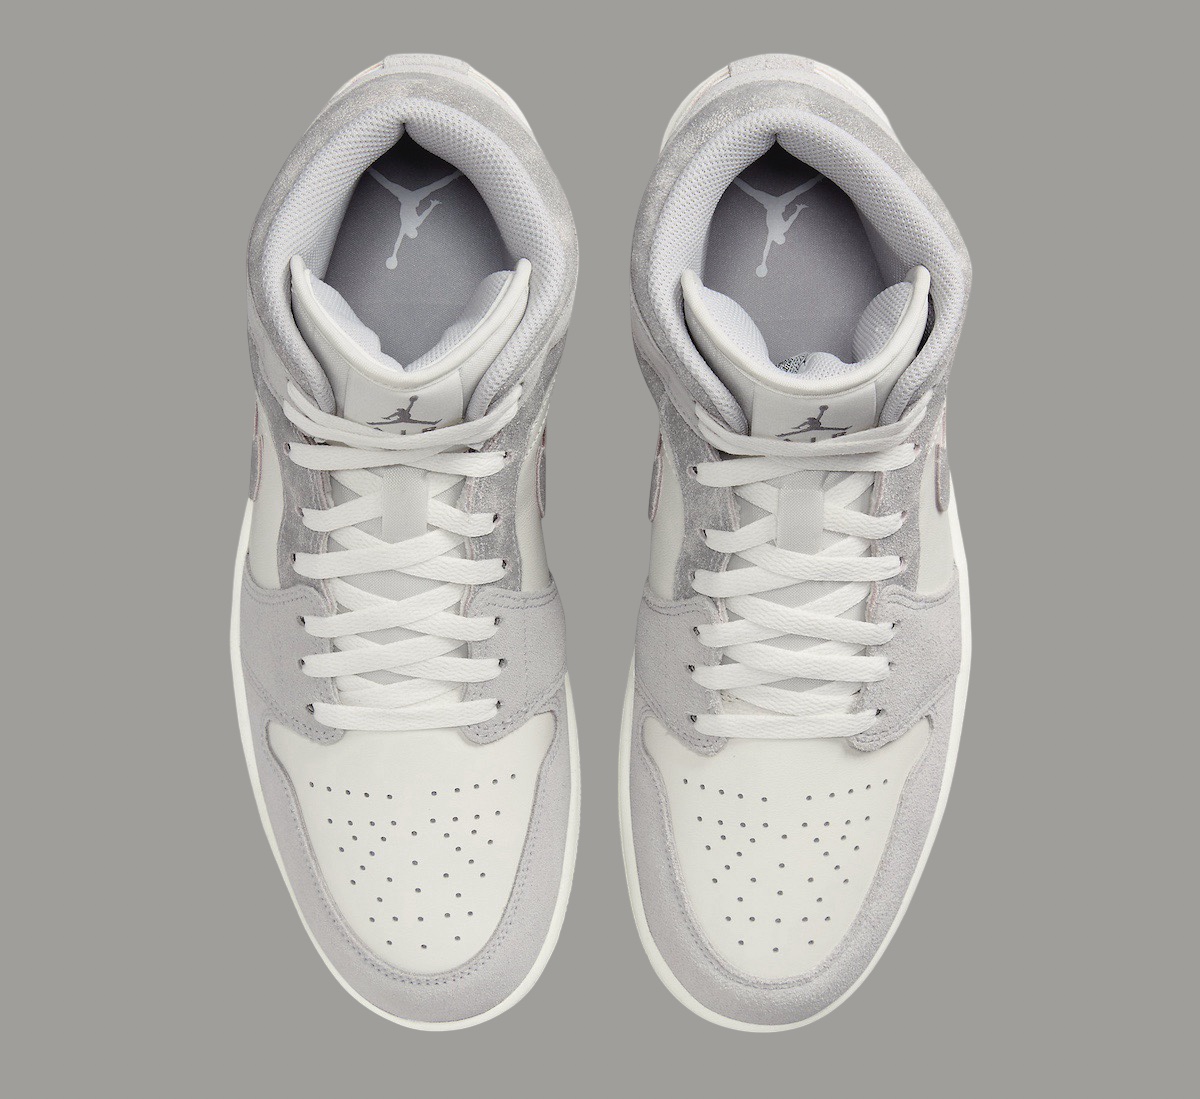 official images of the air jordan 1 mid siempre familia surface